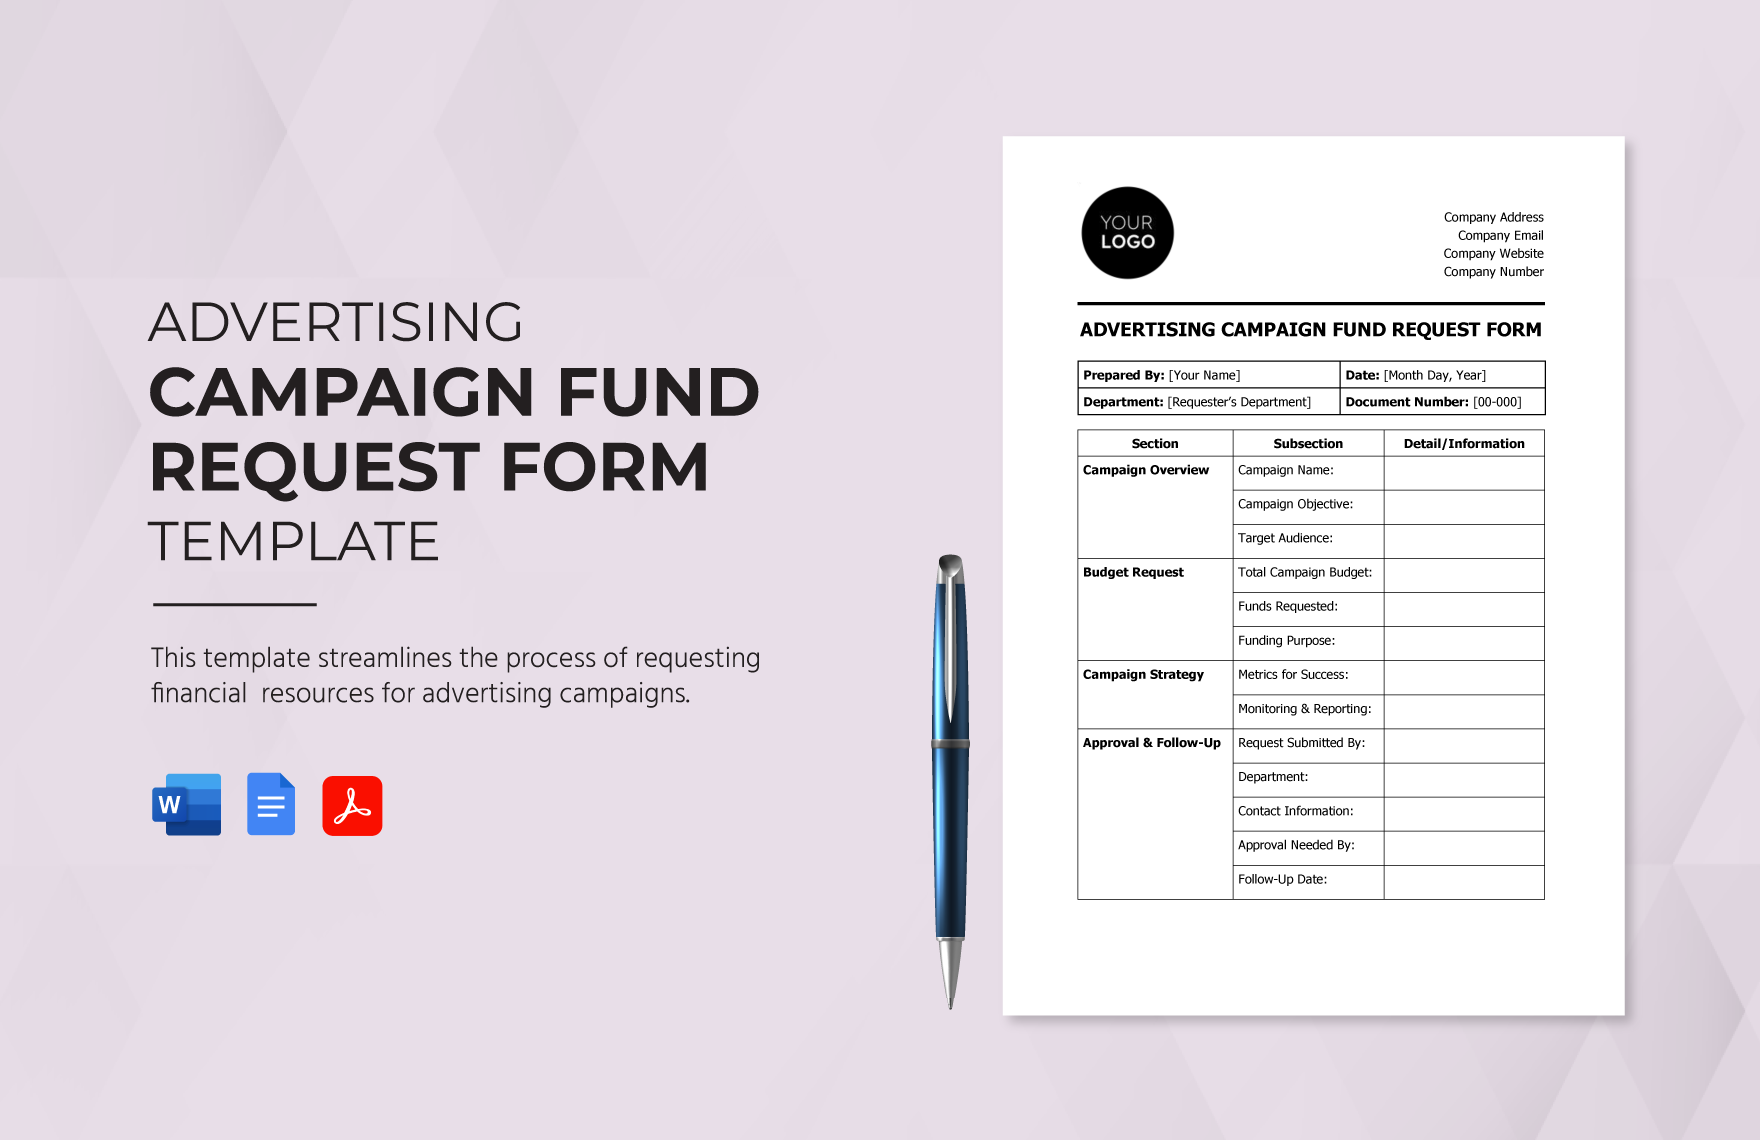 Advertising Campaign Fund Request Form Template in Word, Google Docs, PDF